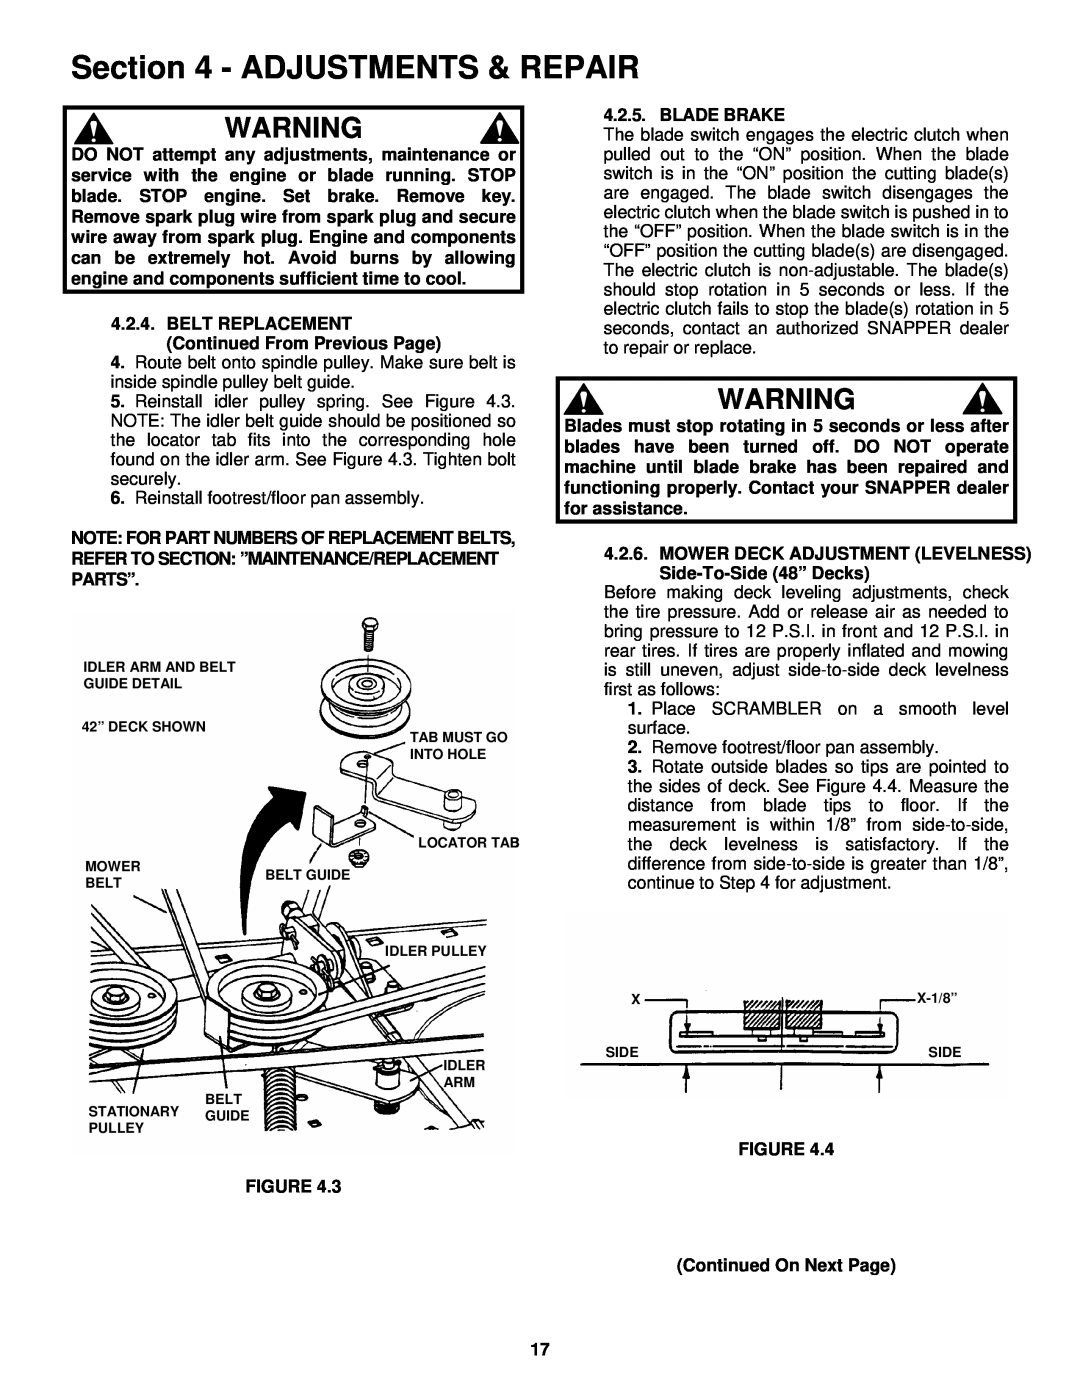 Snapper YZ18426BVE, YZ20486BVE important safety instructions Adjustments & Repair, Reinstall footrest/floor pan assembly 